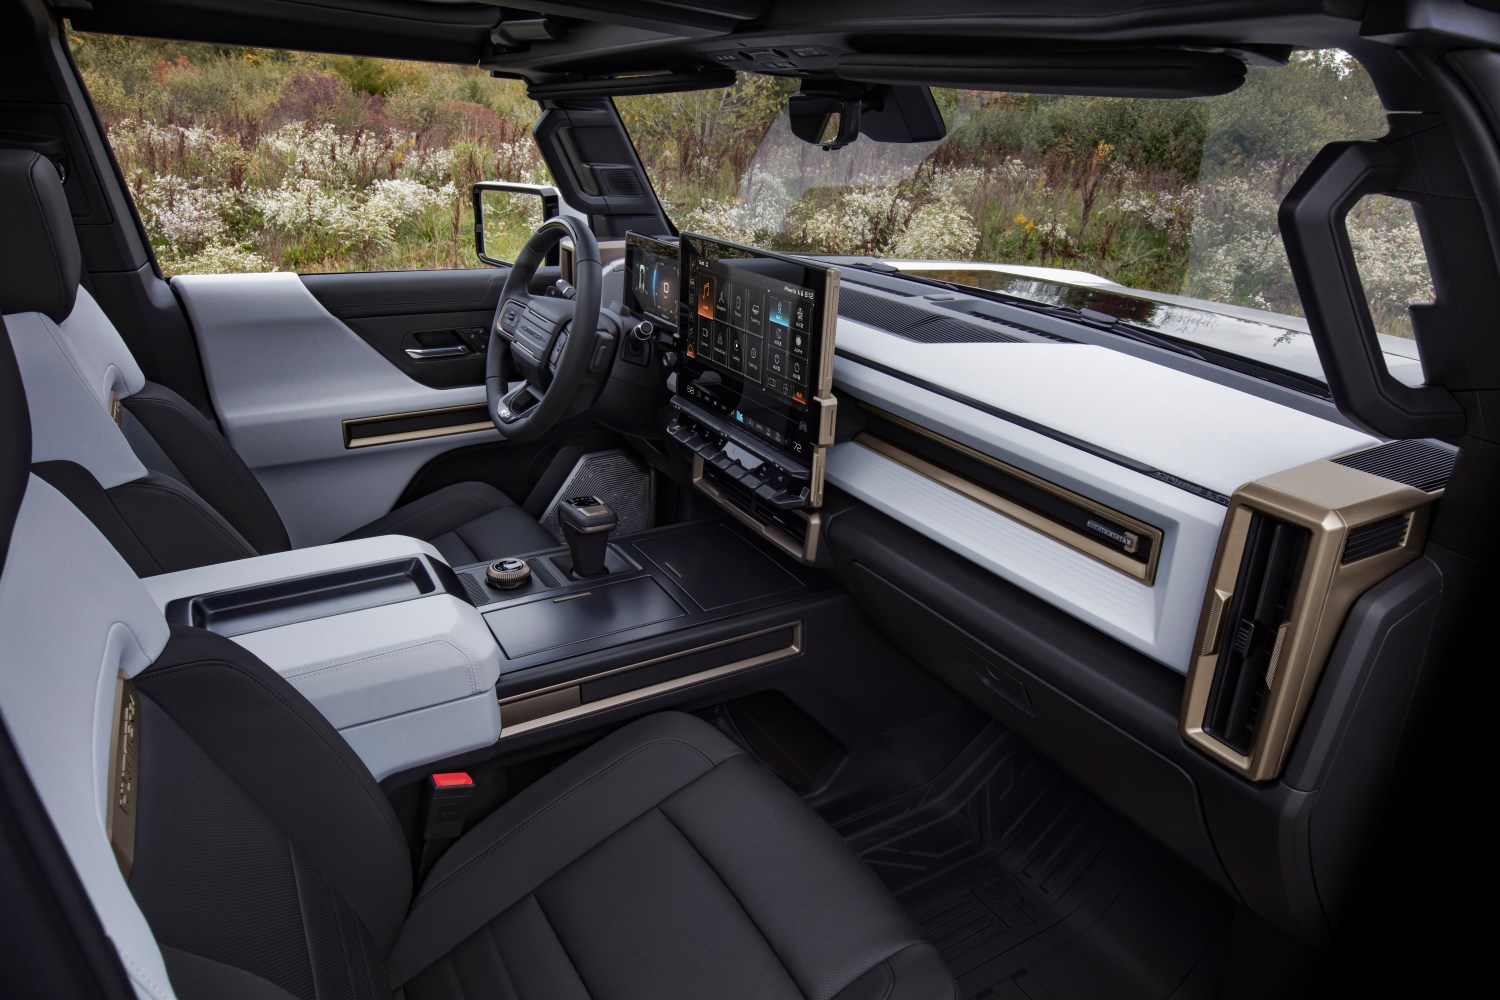 GMC reveals the Hummer EV: 1,000 HP, 350 mile range, and 0-60 in 'around 3  seconds' | TechCrunch